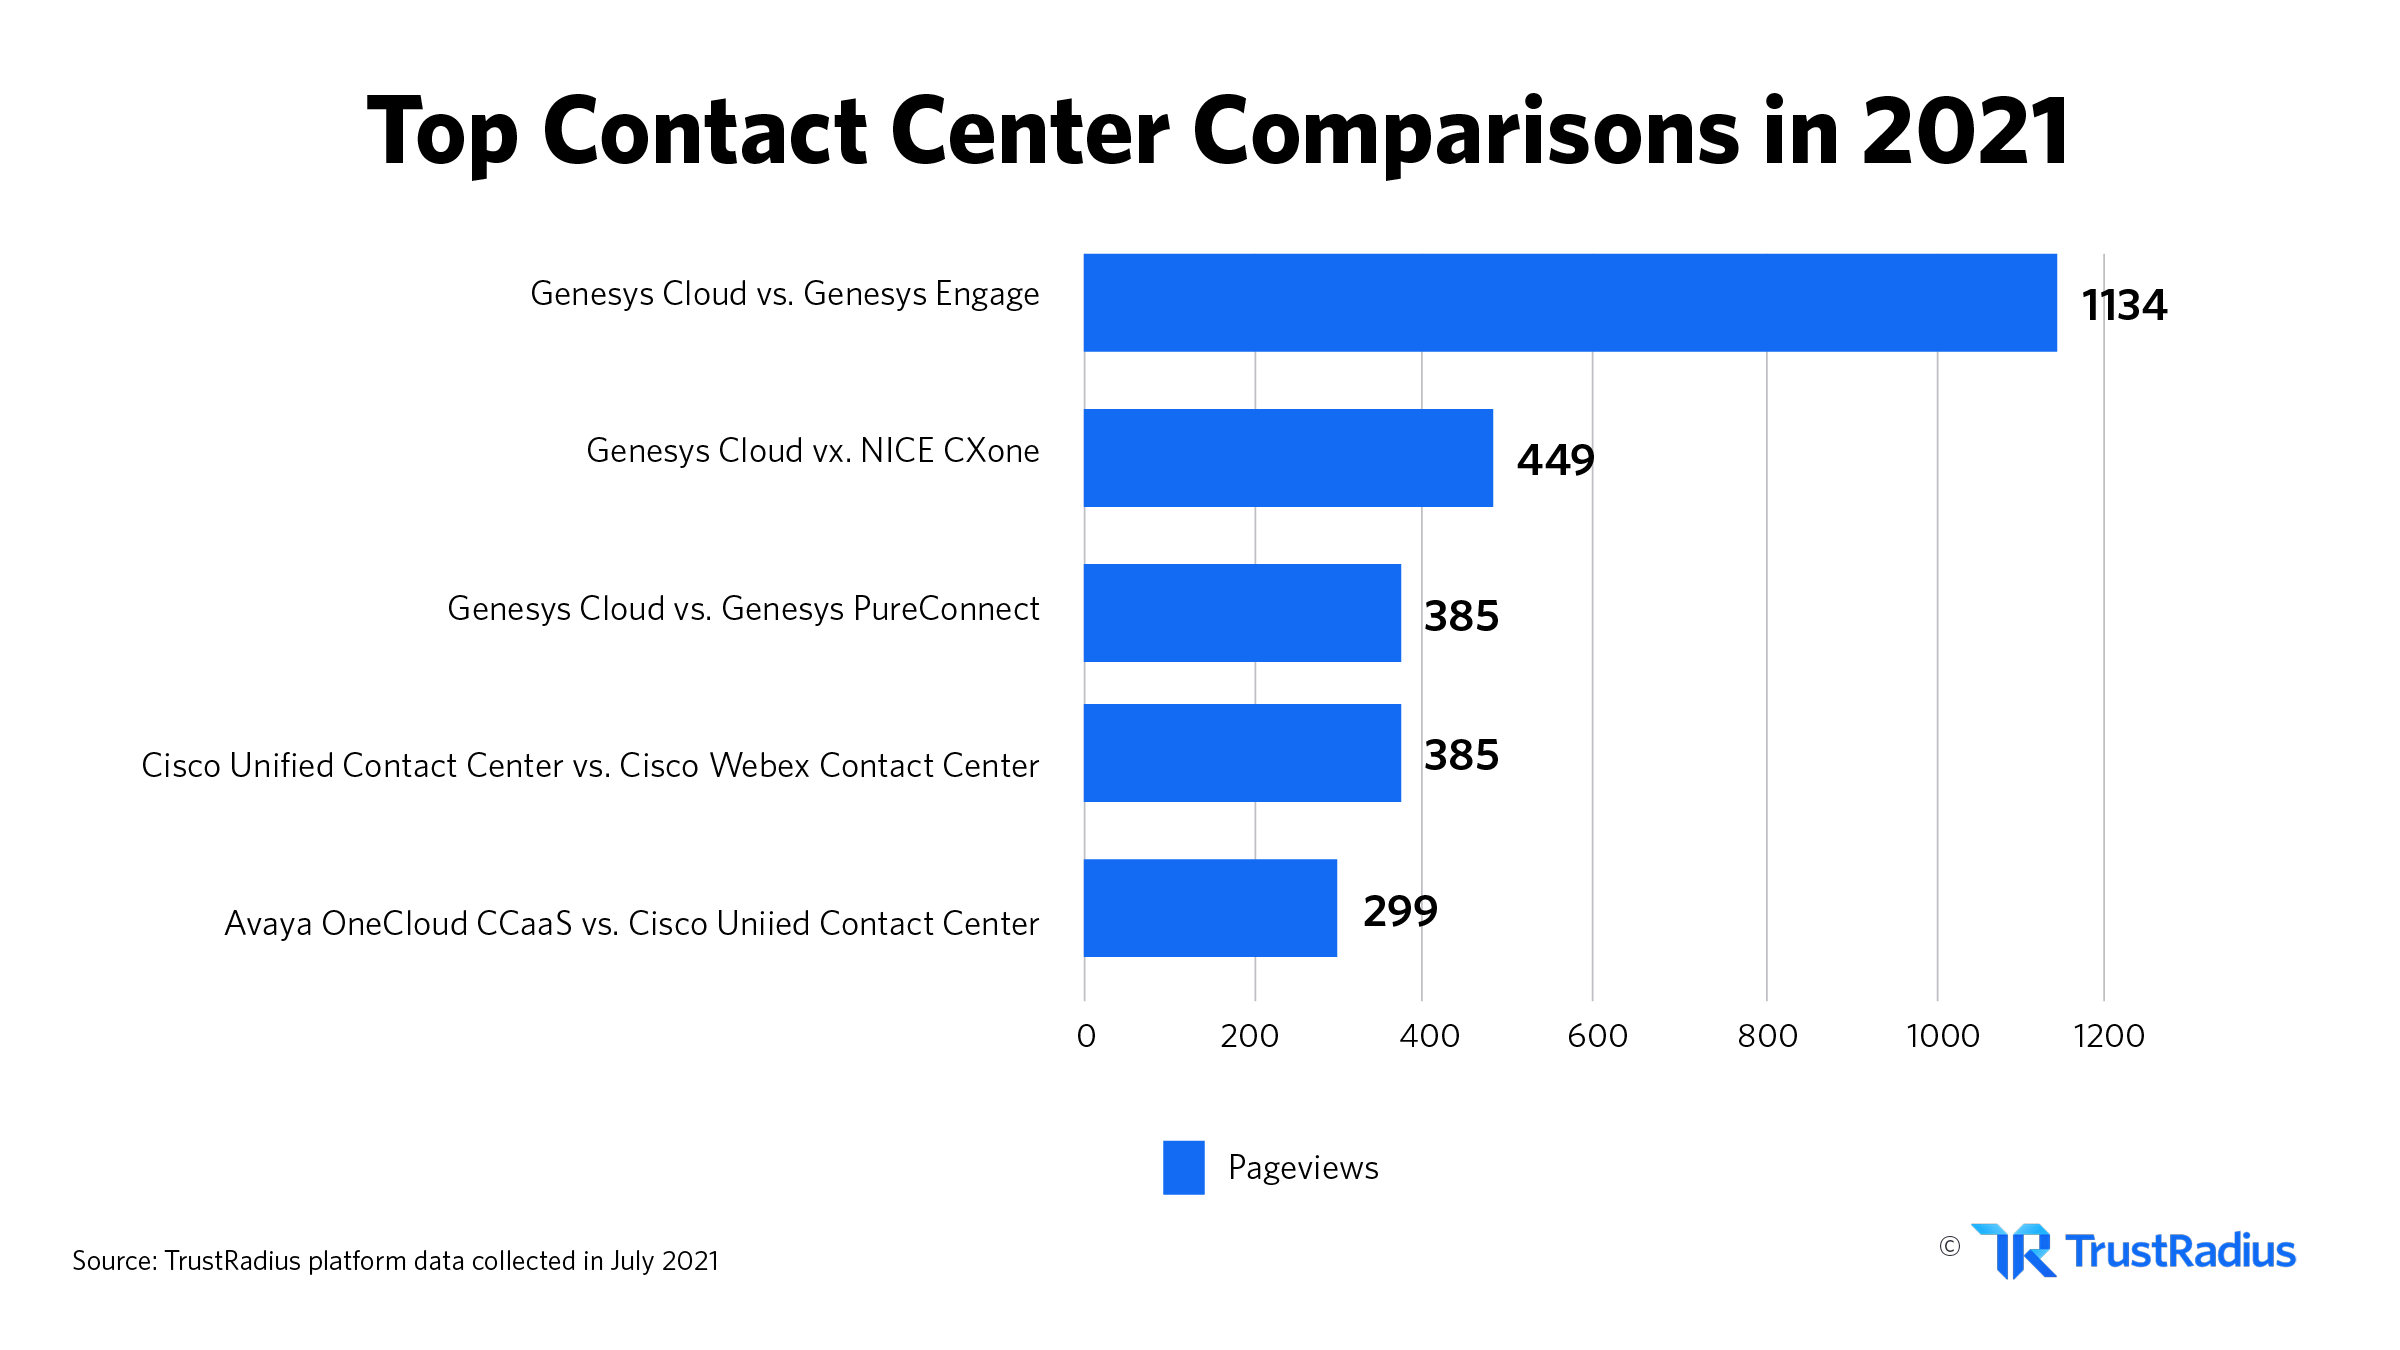 Top contact center comparisons in 2021